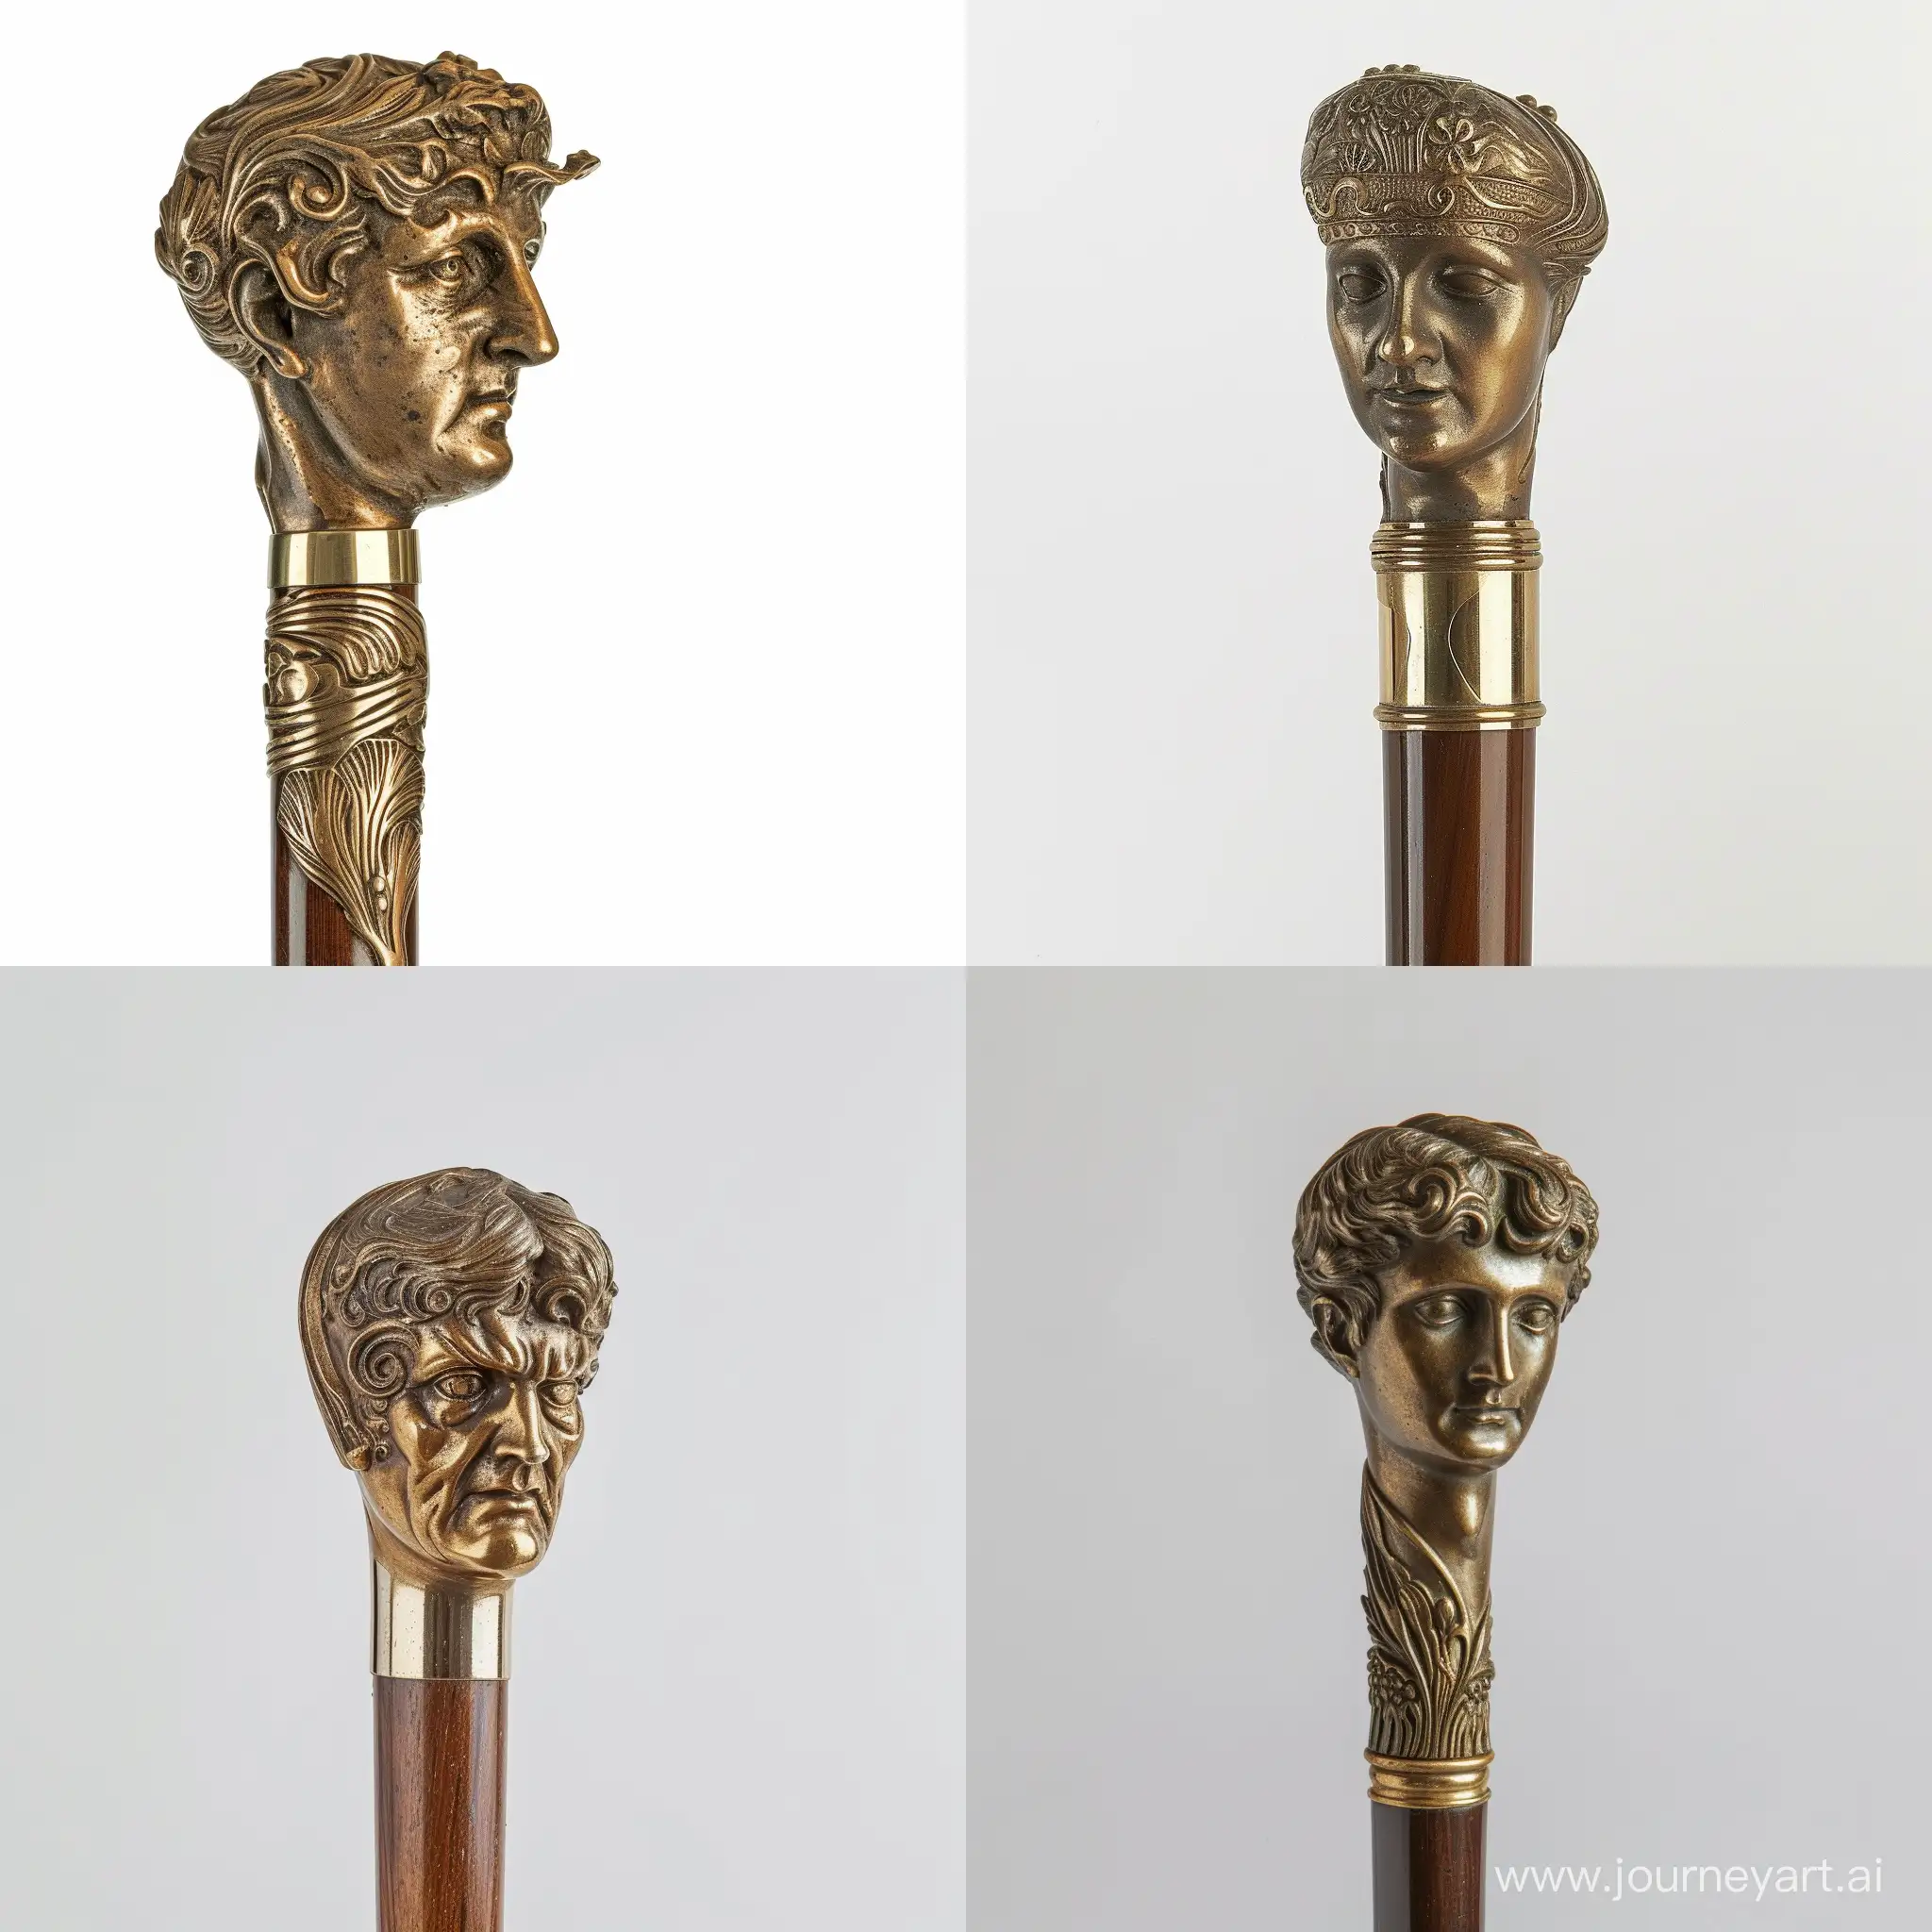 antique nineteenth-century cane in the Art Nouveau style, the head of the cane is made of brass, hd, detailed

